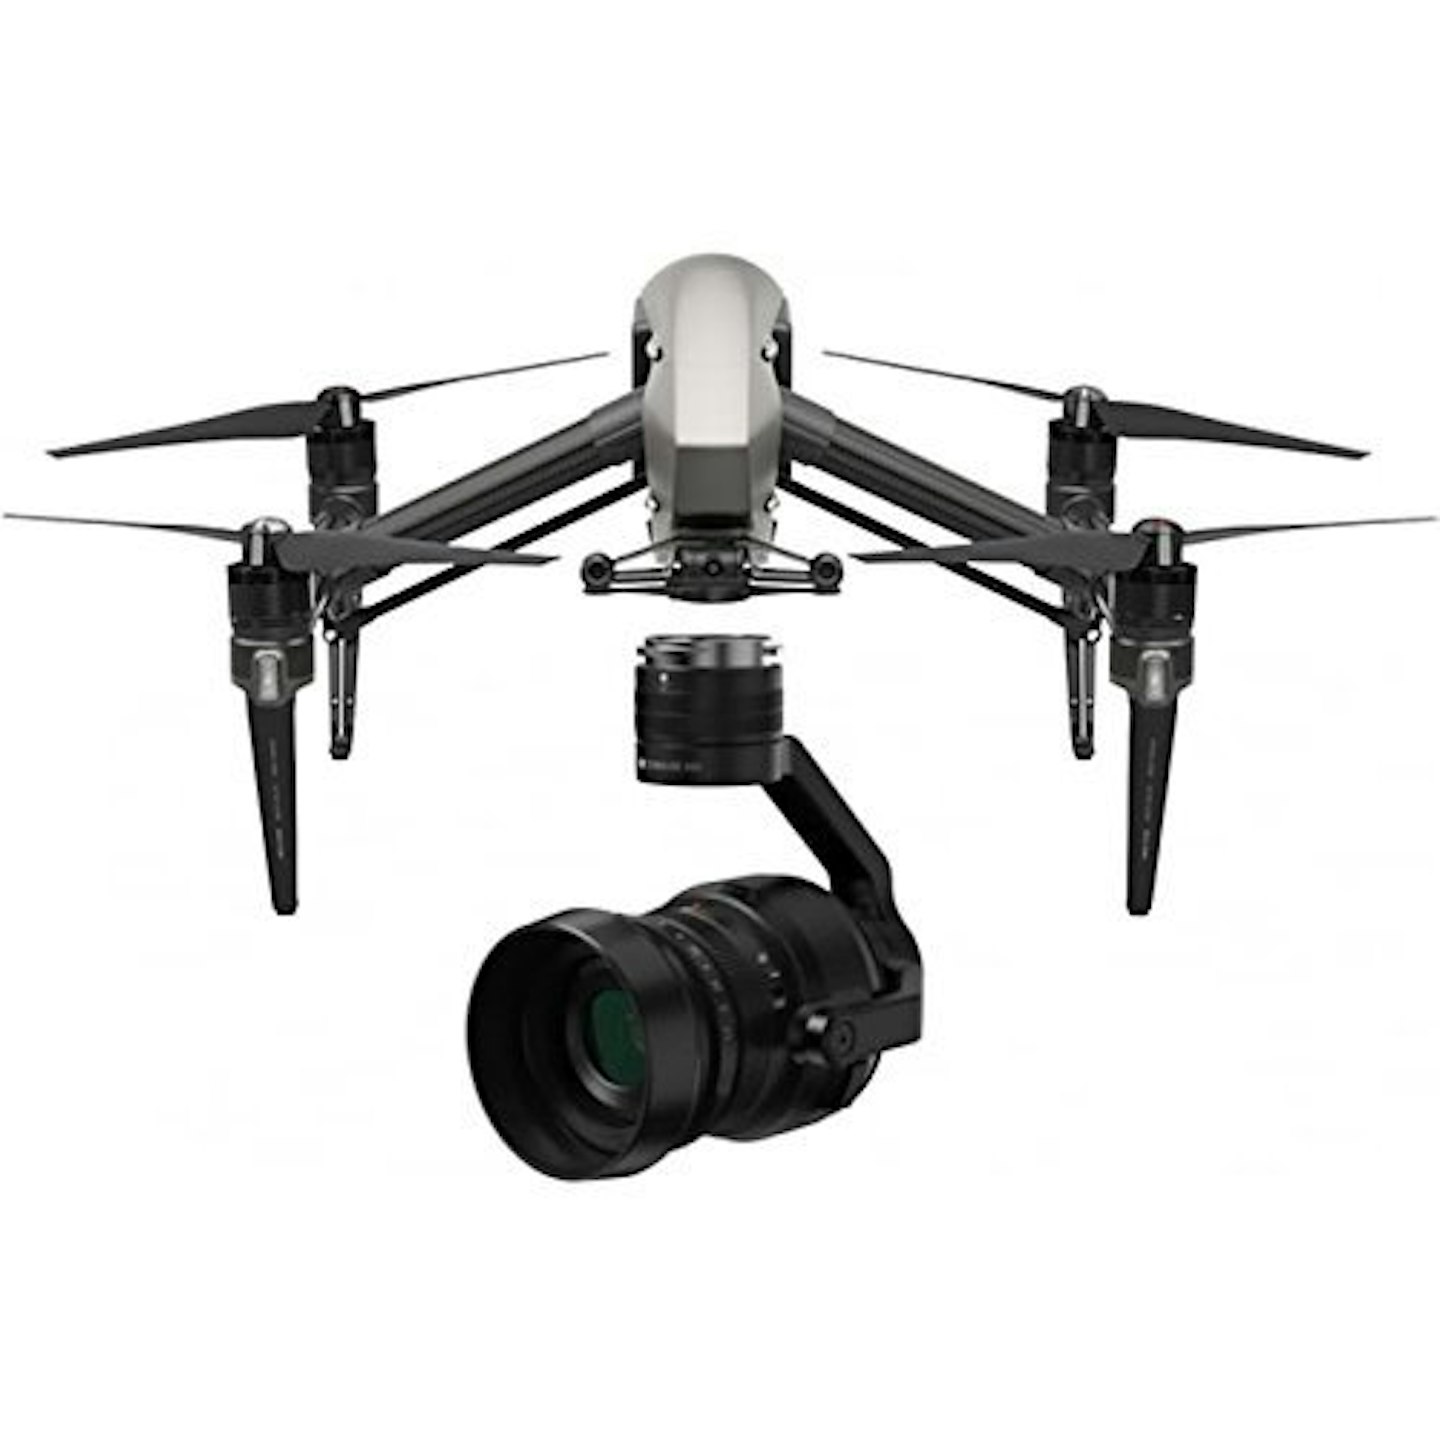 DJI Inspire 2 with Zenmuse X5S camera and gimbal, £5,000